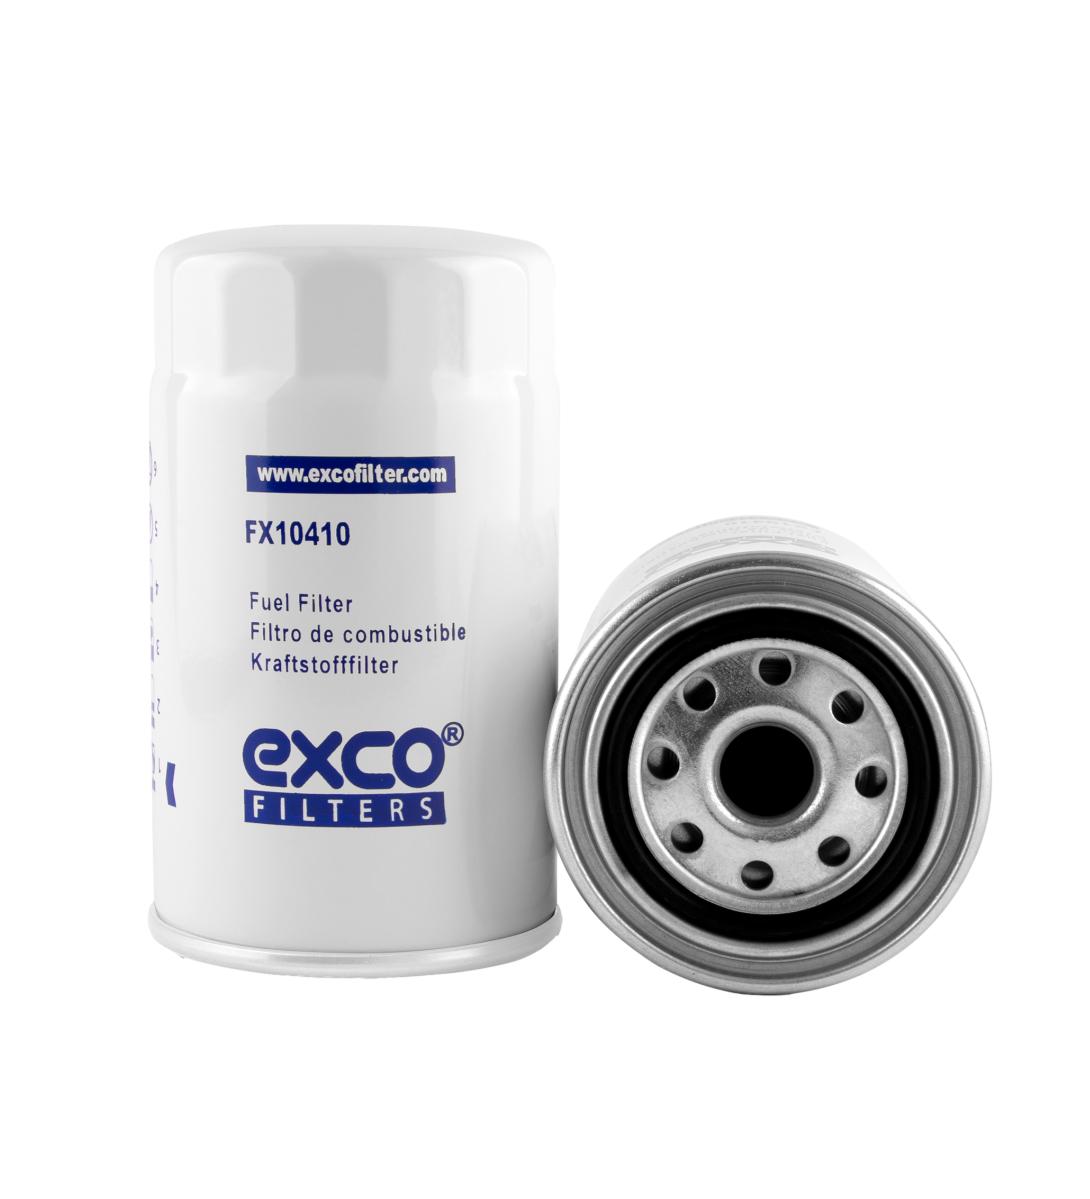 
                        
                                                                                                                RYCO Z208 FUEL FILTER CROSS REFERENCE
                                                                            
                            